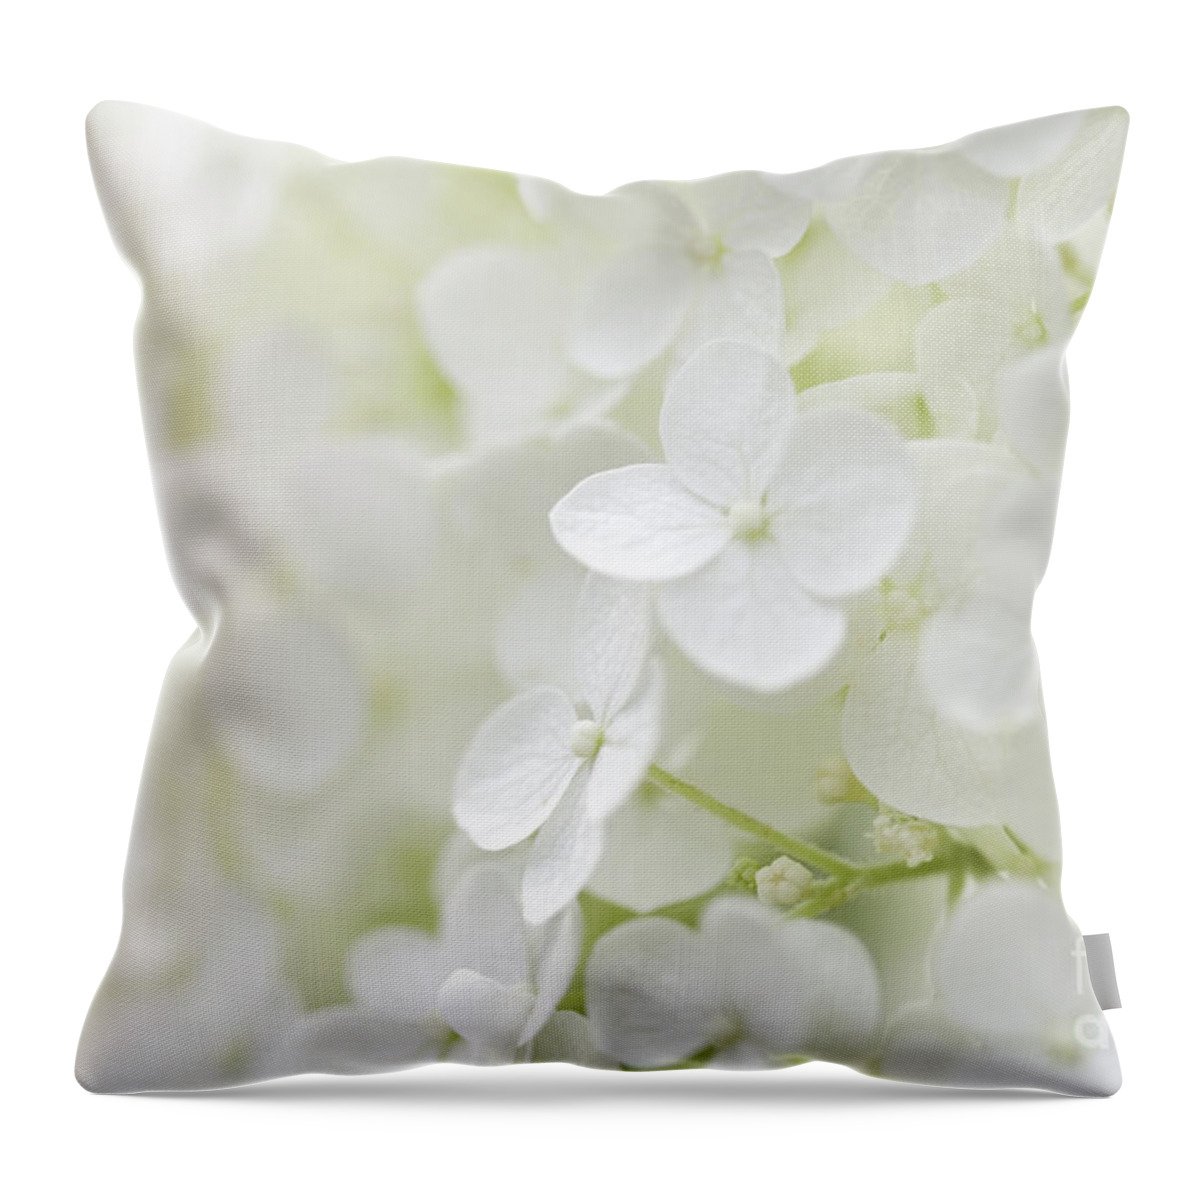 Hydrangea Throw Pillow featuring the photograph Purity by Patty Colabuono